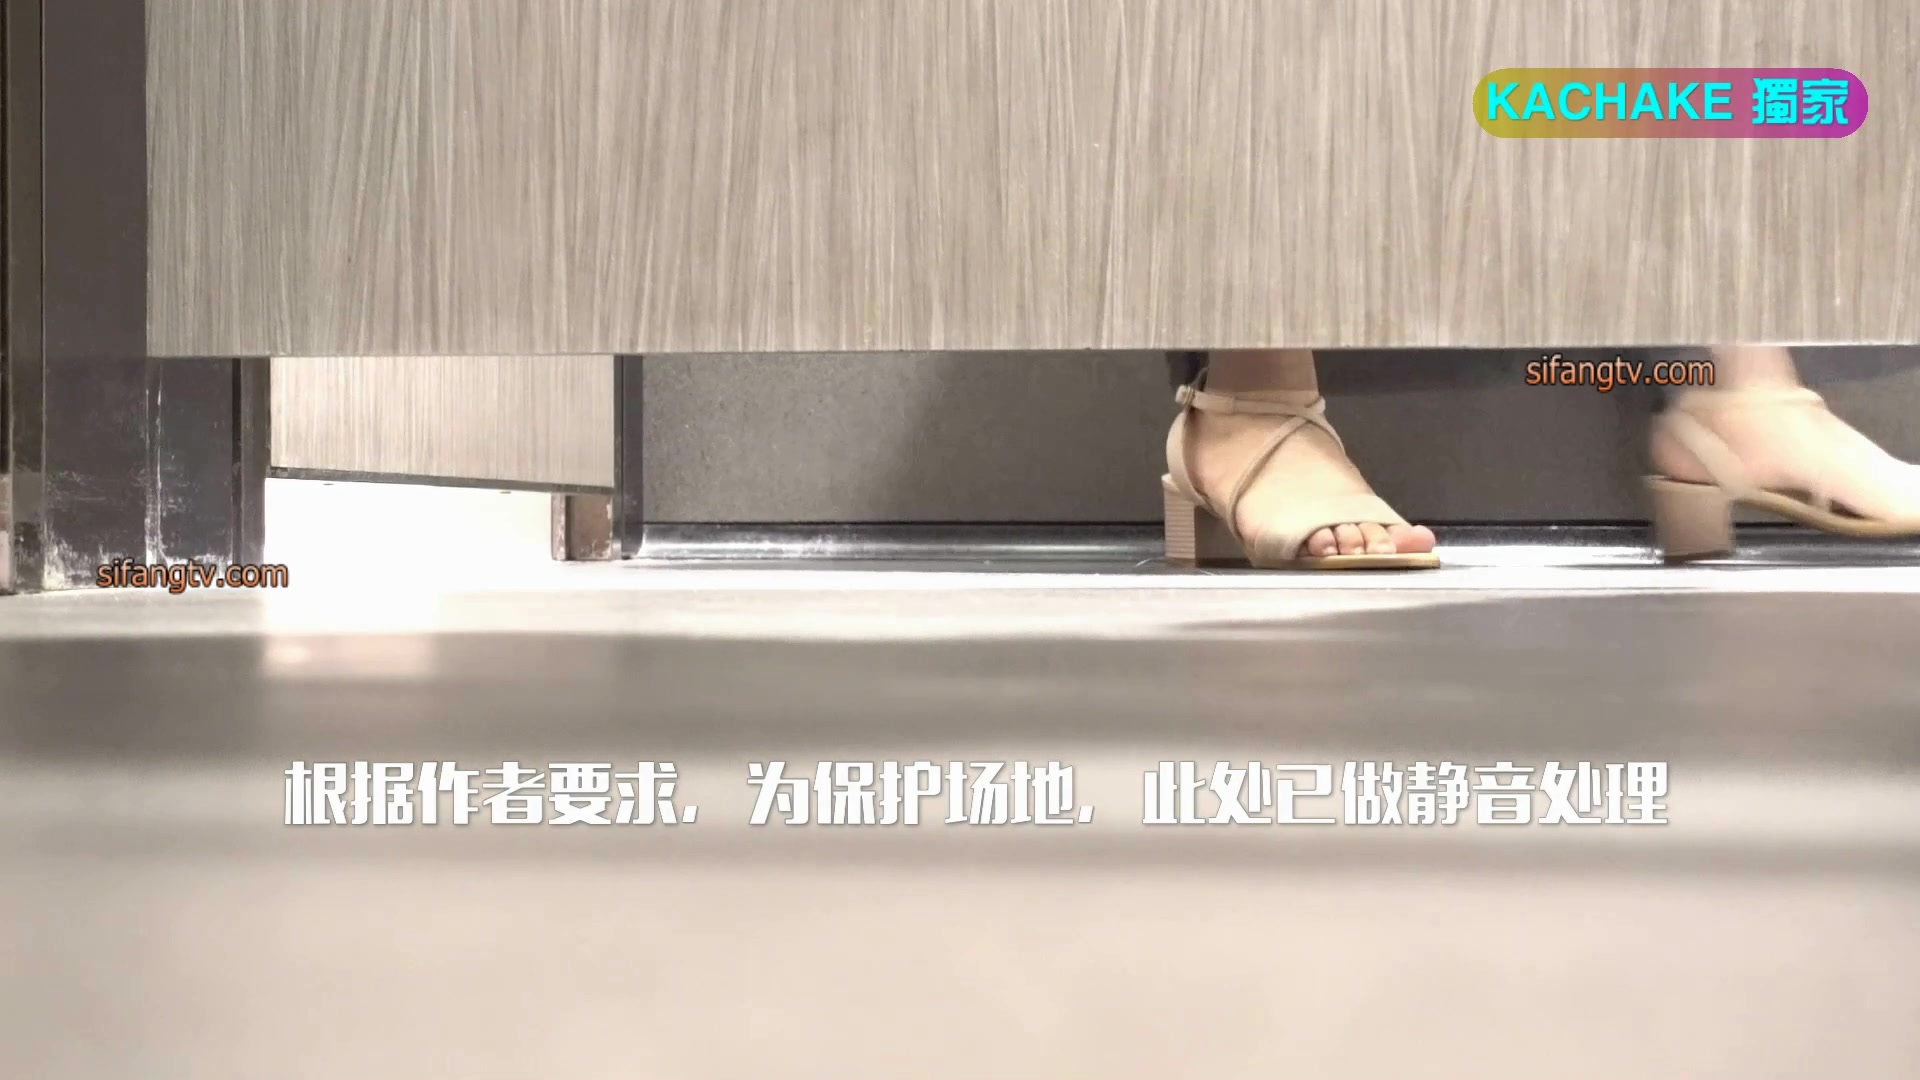 Chinese lady toilet2 - video 2 photo